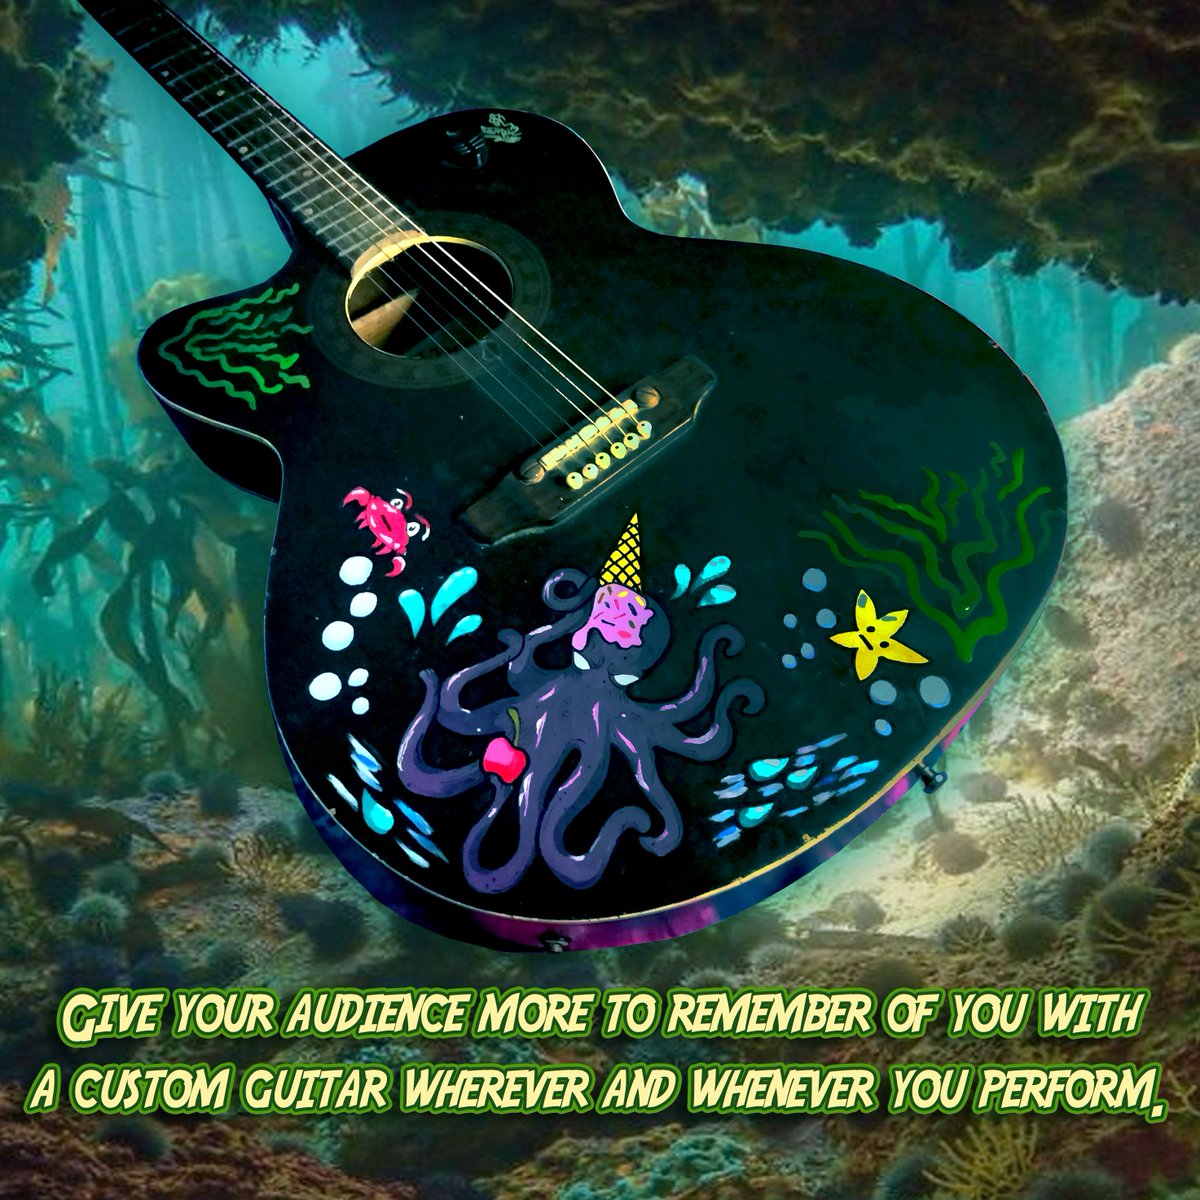 As a guitarist, give your audiences something memorable to remember. 
#artisttools #musictools #musicsupplies #musicaddict #guitaraddict #guitarstore #smallbusiness #customguitar #musicartist #customization #guitarpainting #arttipsandtricks #musicproducts #musiclovers